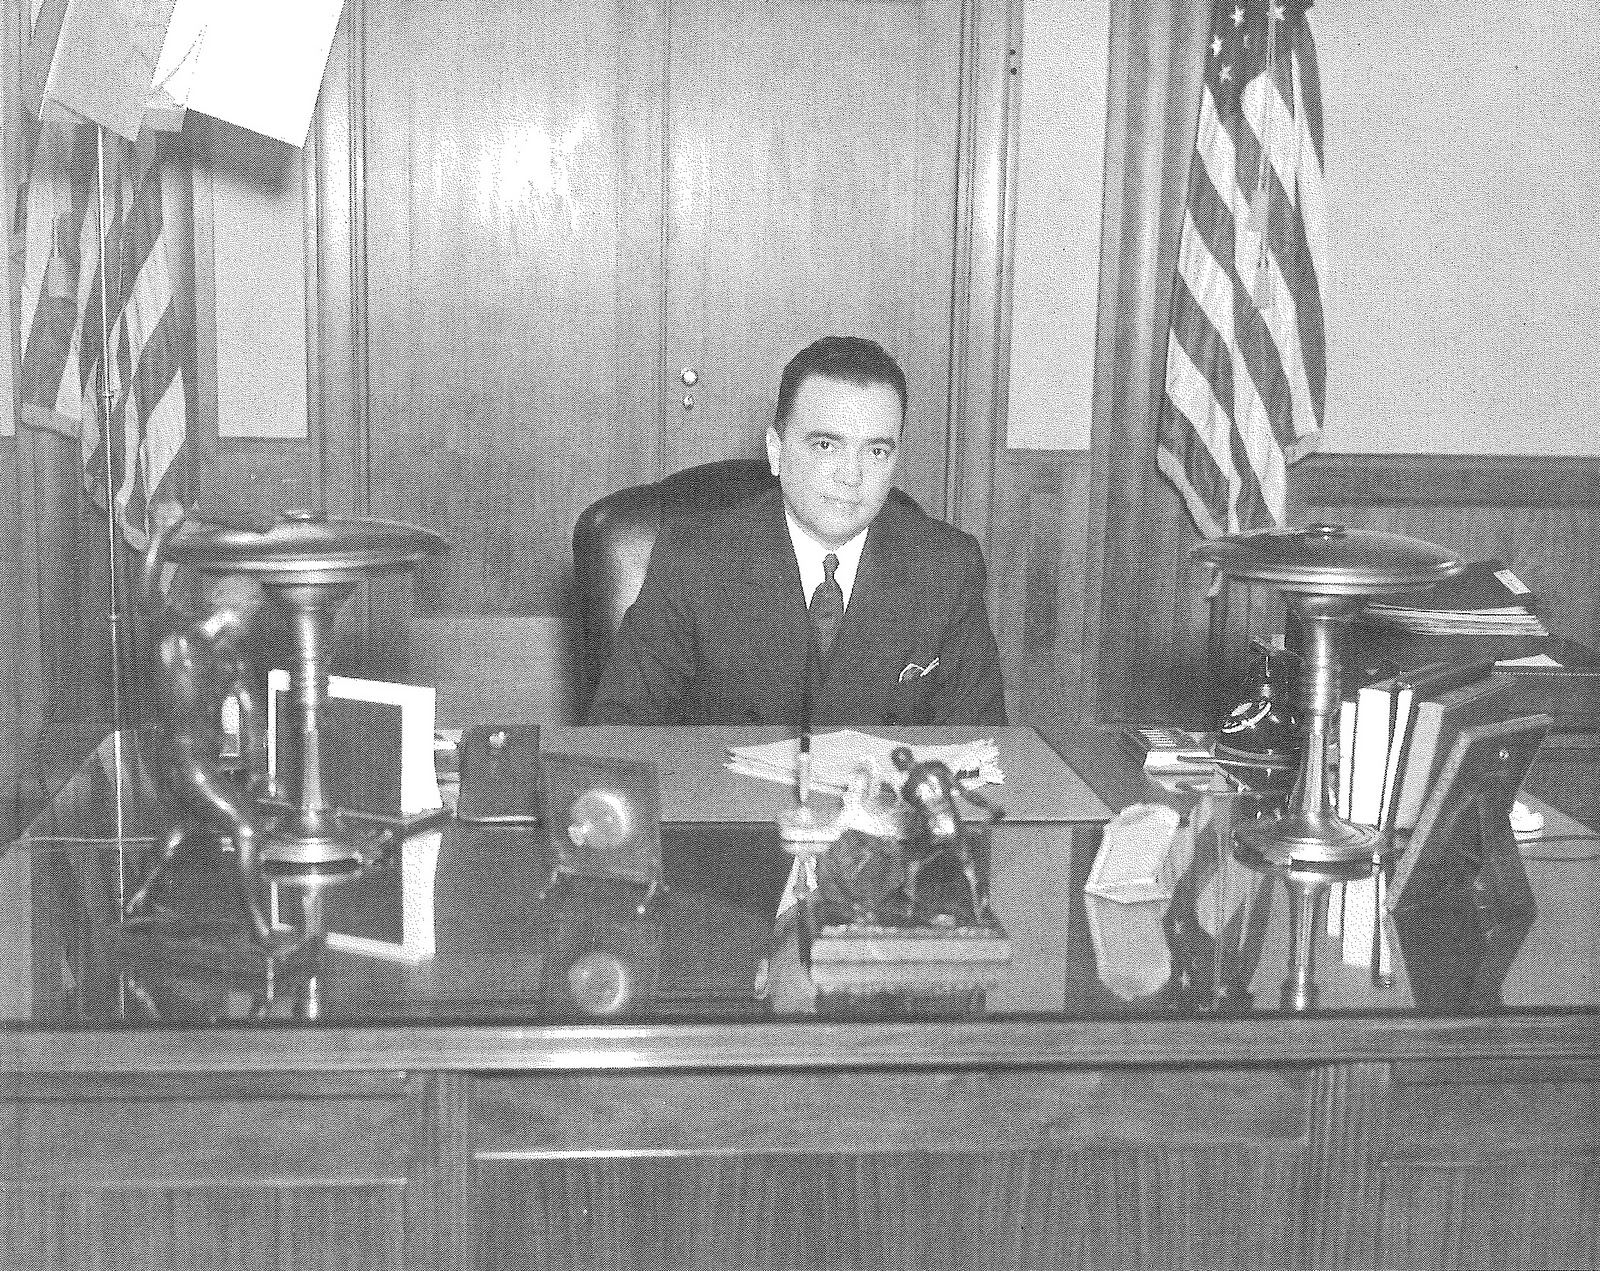 Viral History: More photos of J. Edgar Hoover in the 1930s
